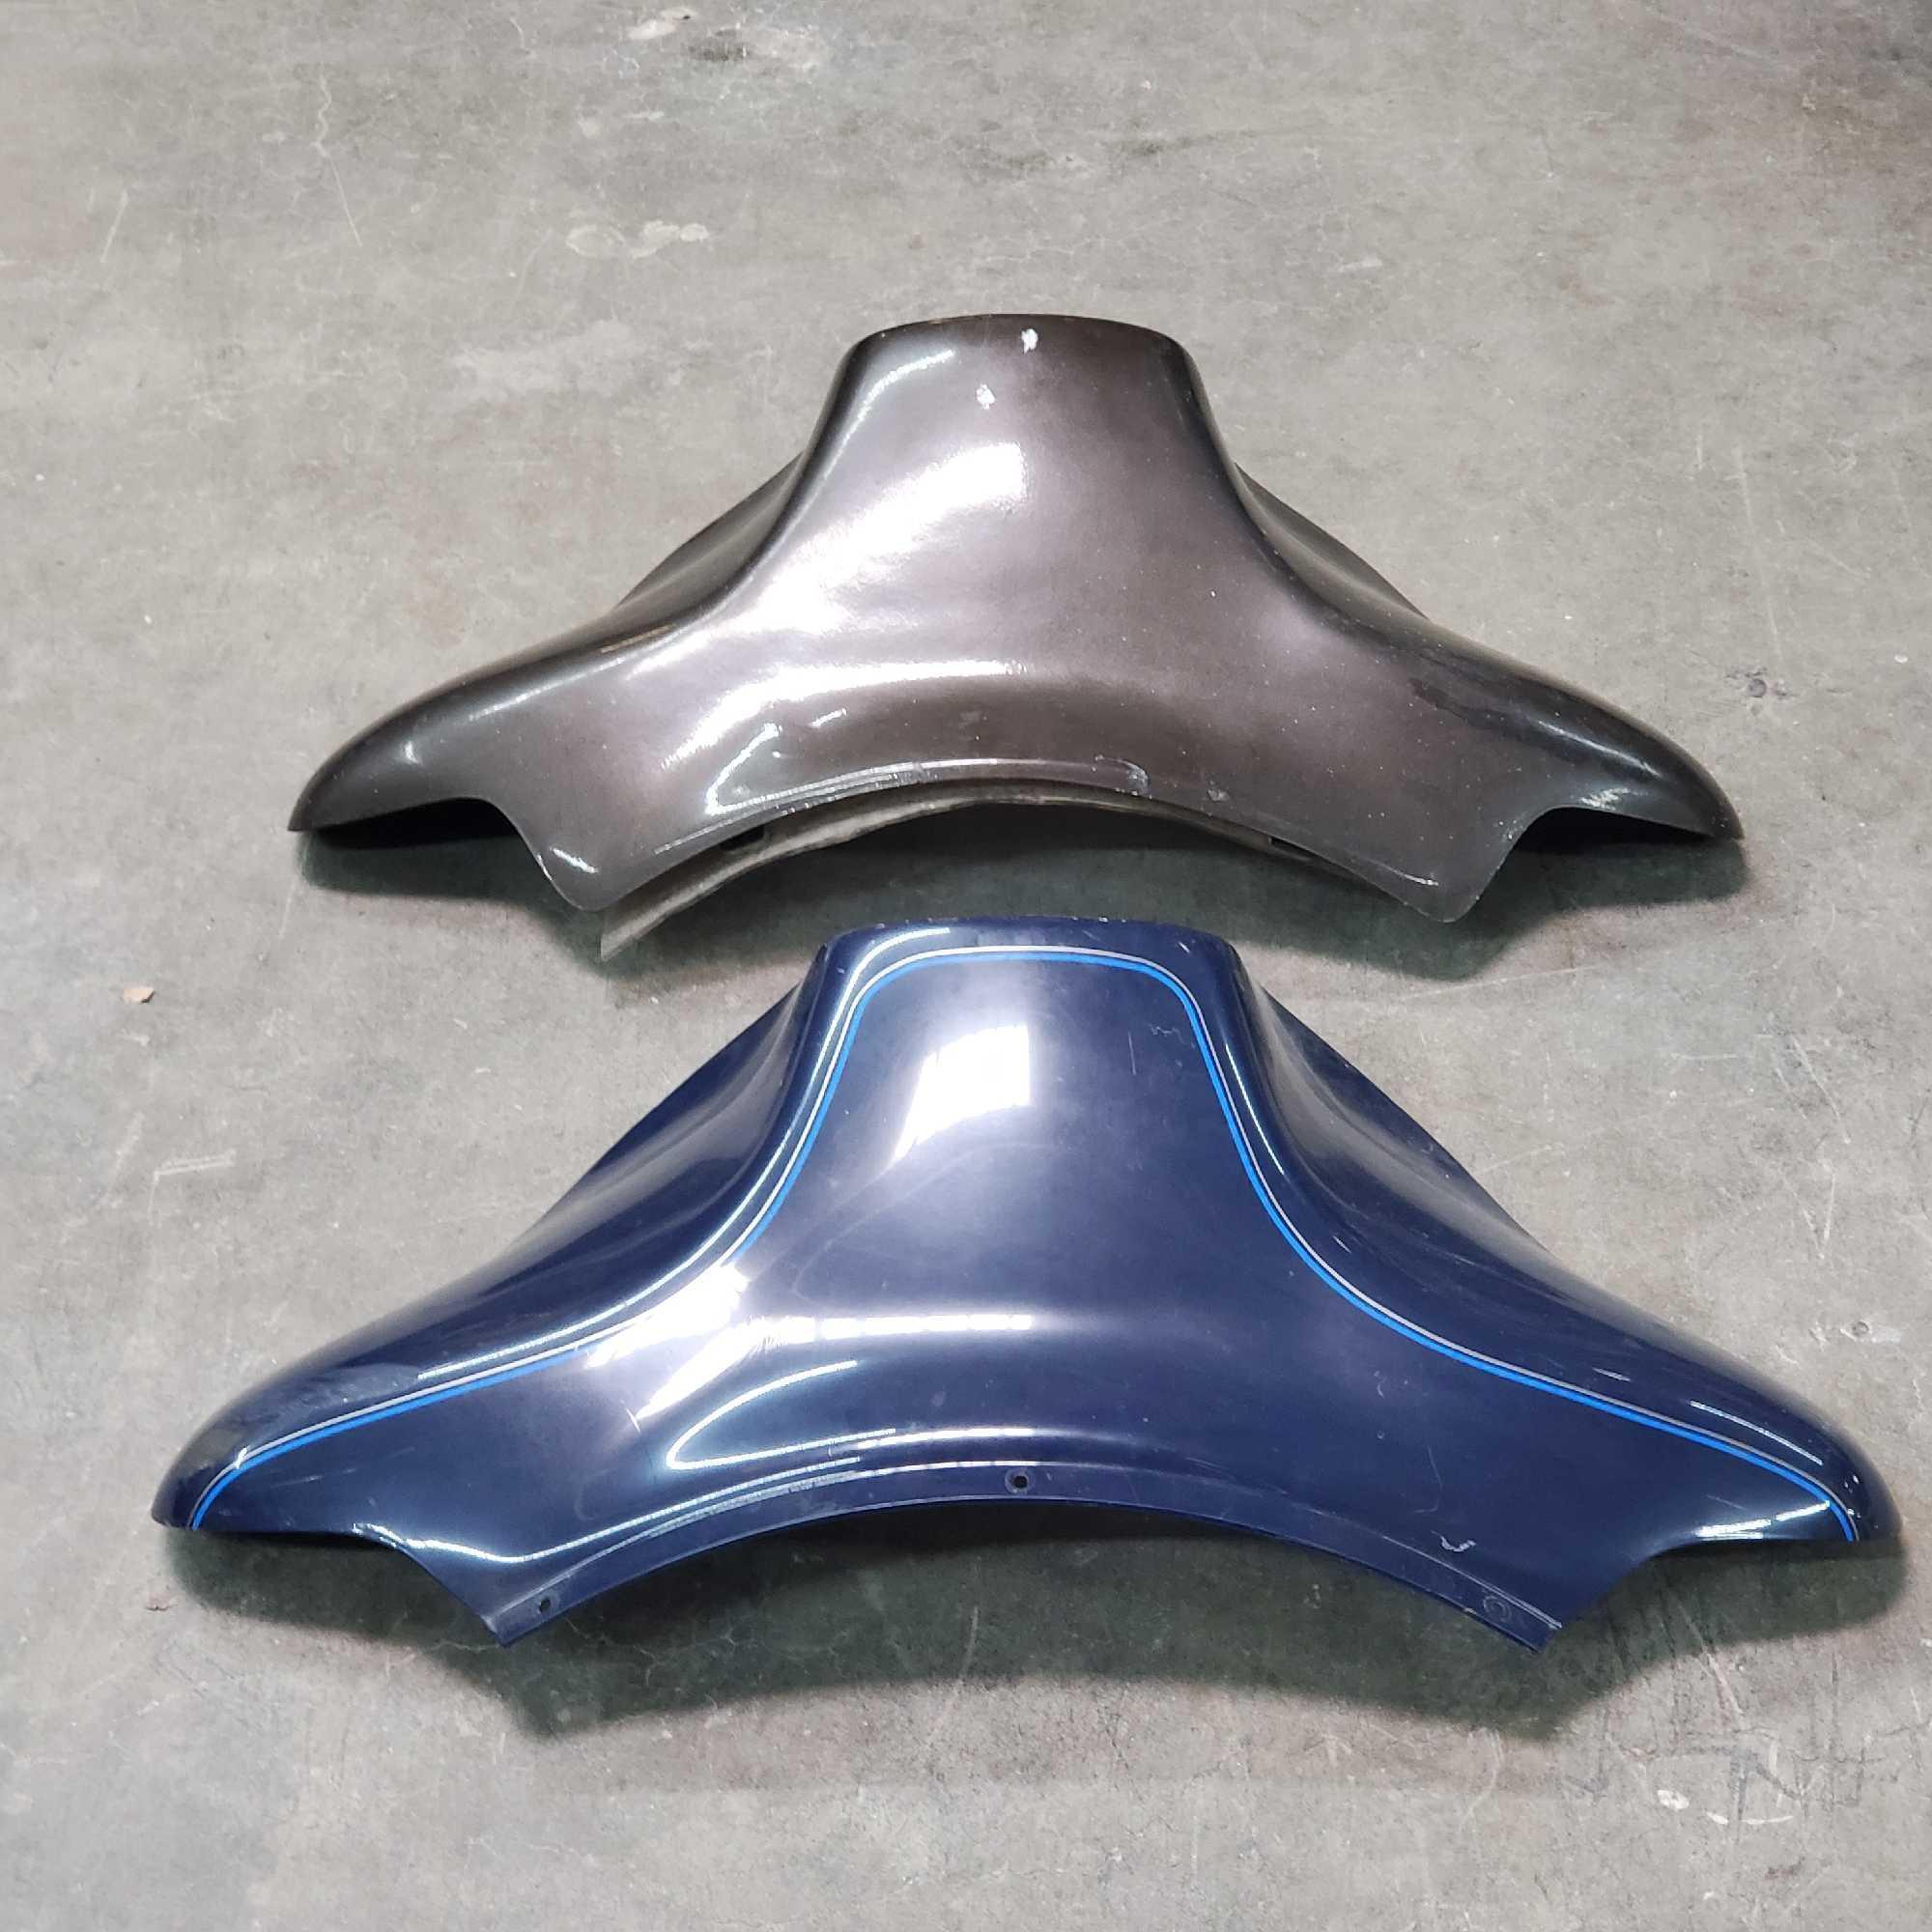 2 Harley Davidson front outer fairings